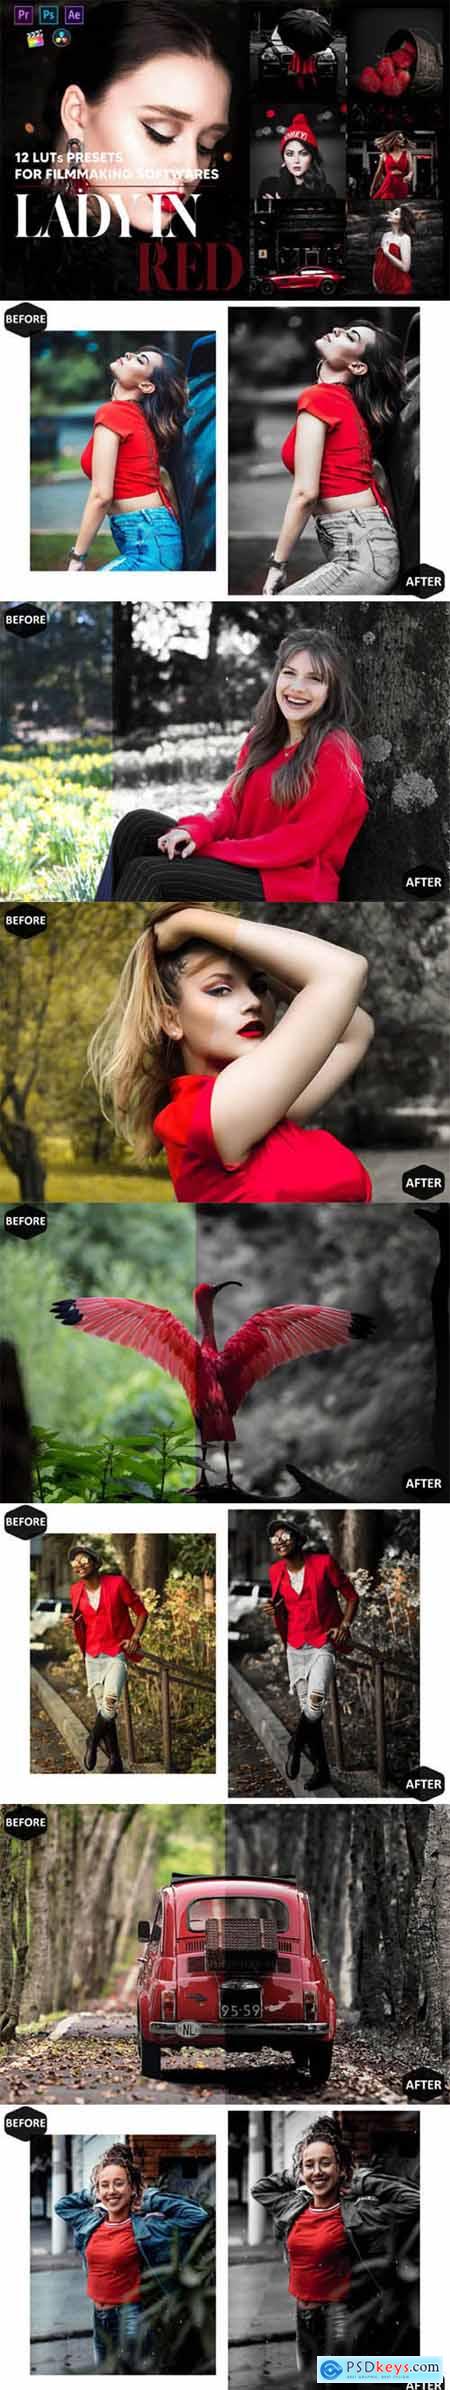 12 Lady in Red Video LUTs Presets